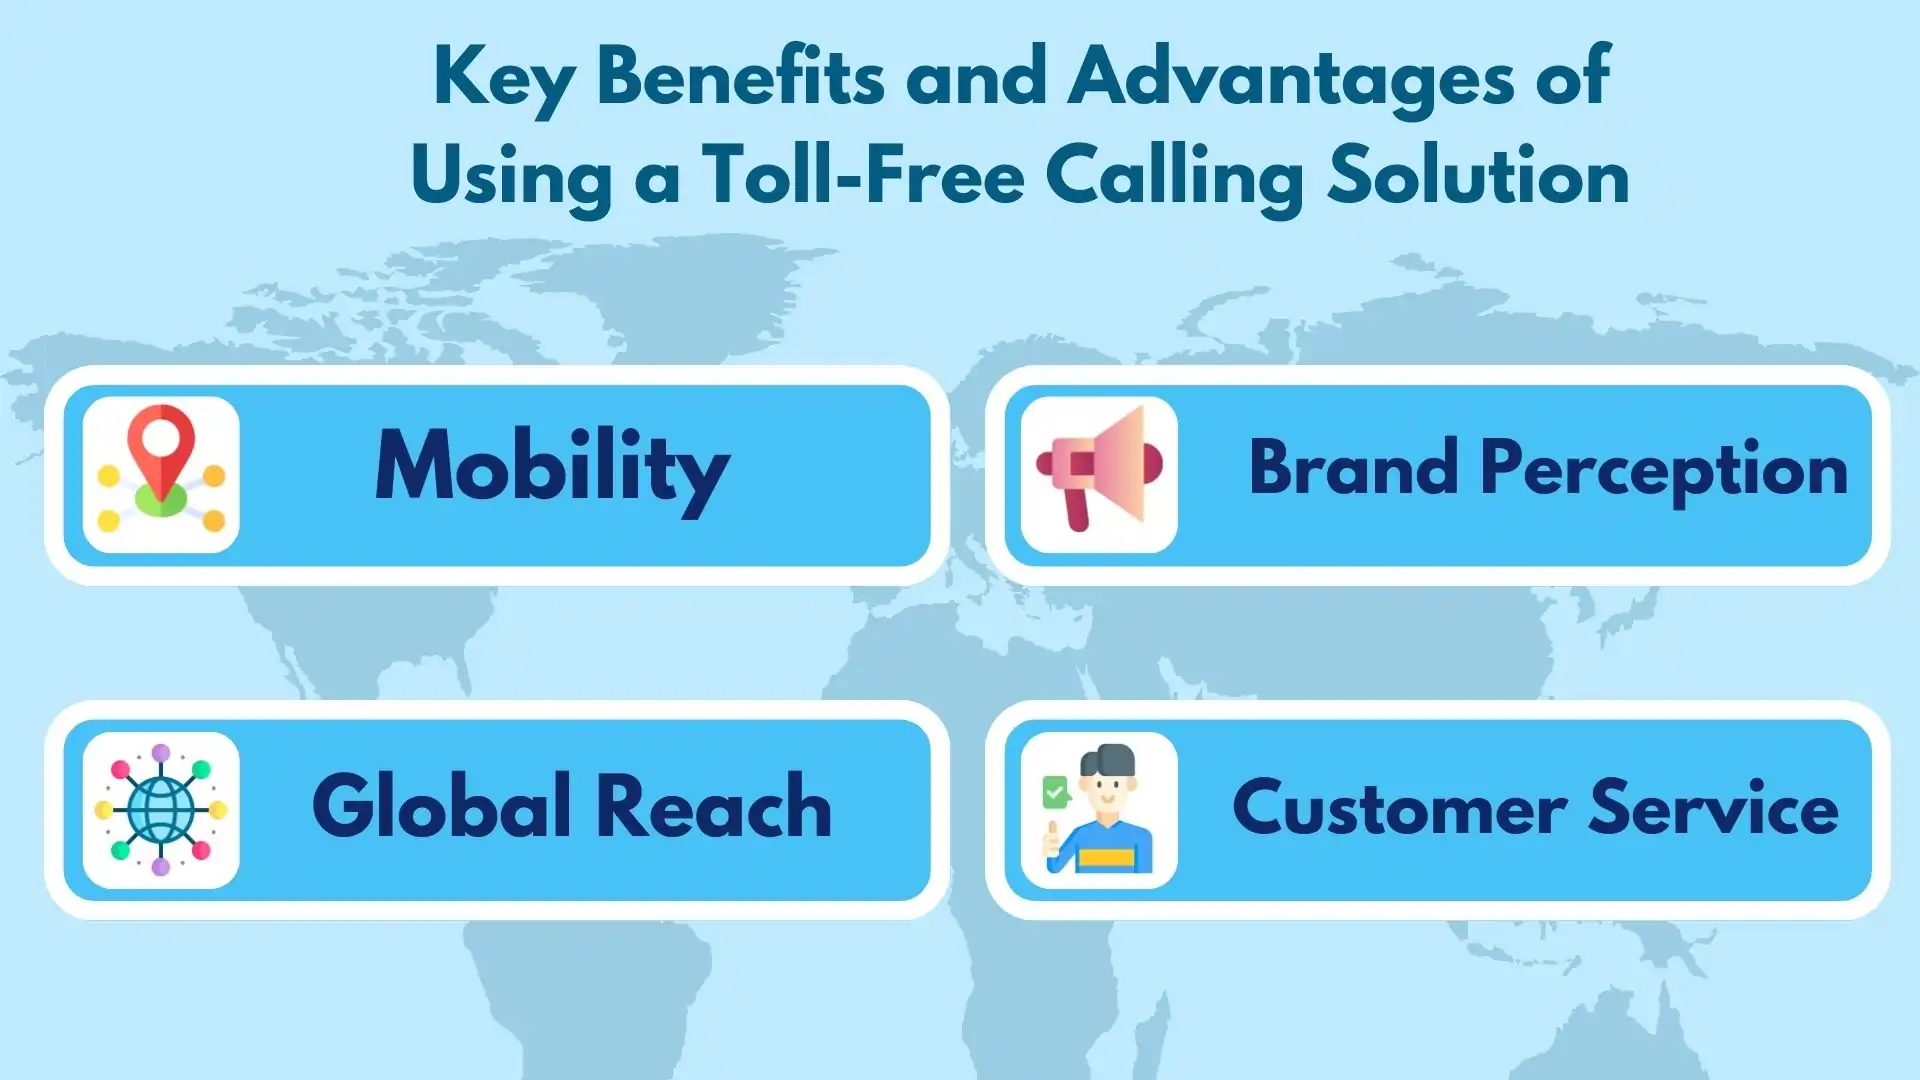 Key Benefits and Advantages of Using a Toll-Free Calling Solution